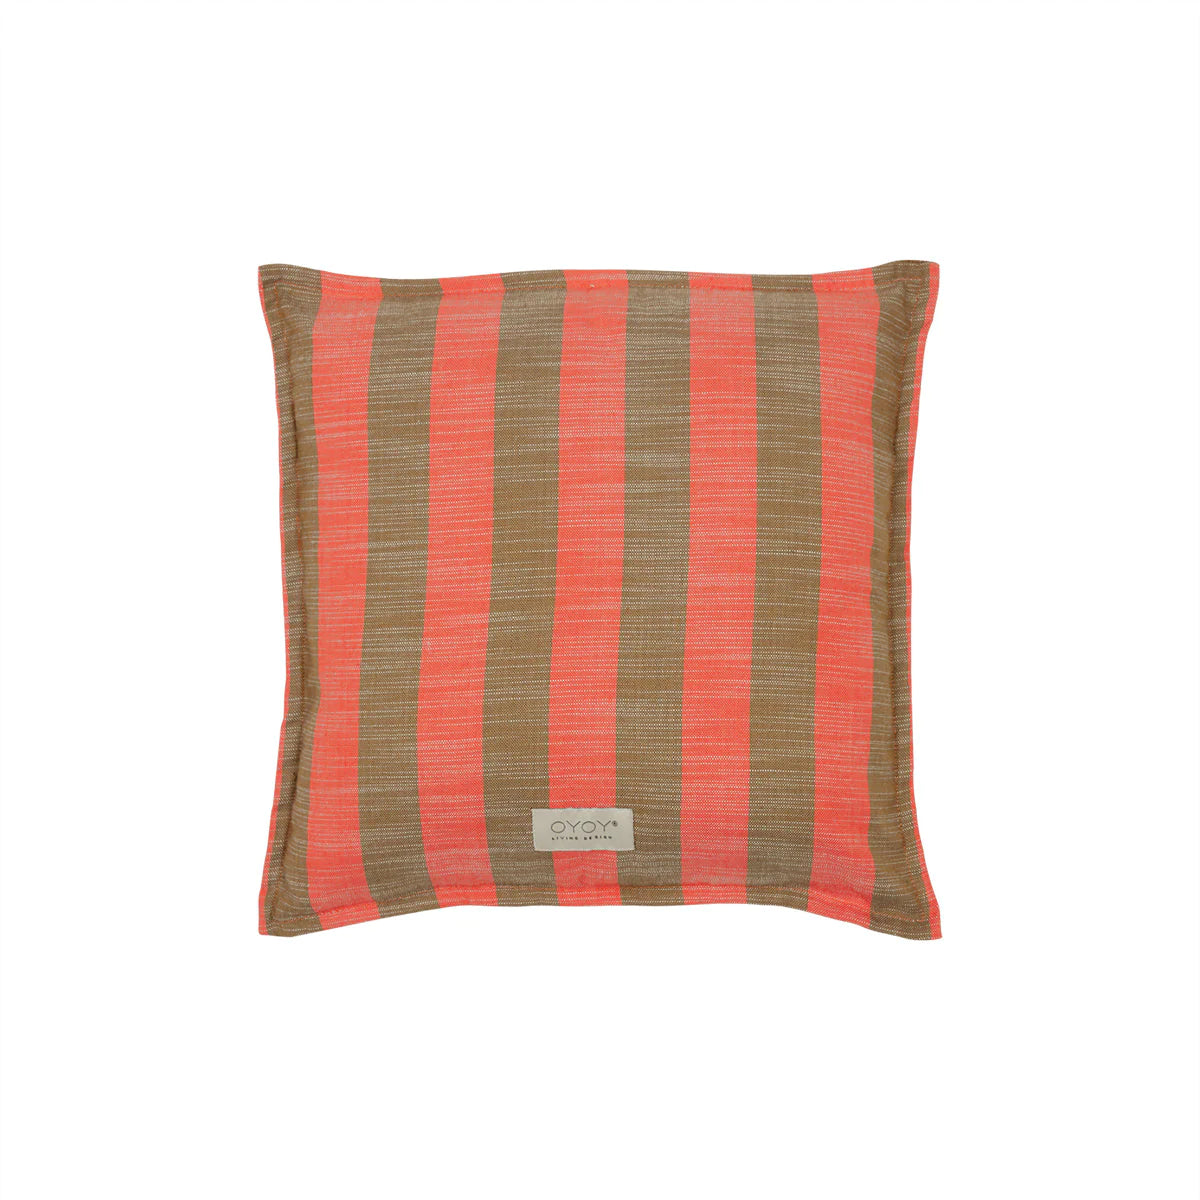 Kyoto outdoor square cushion, cherry red